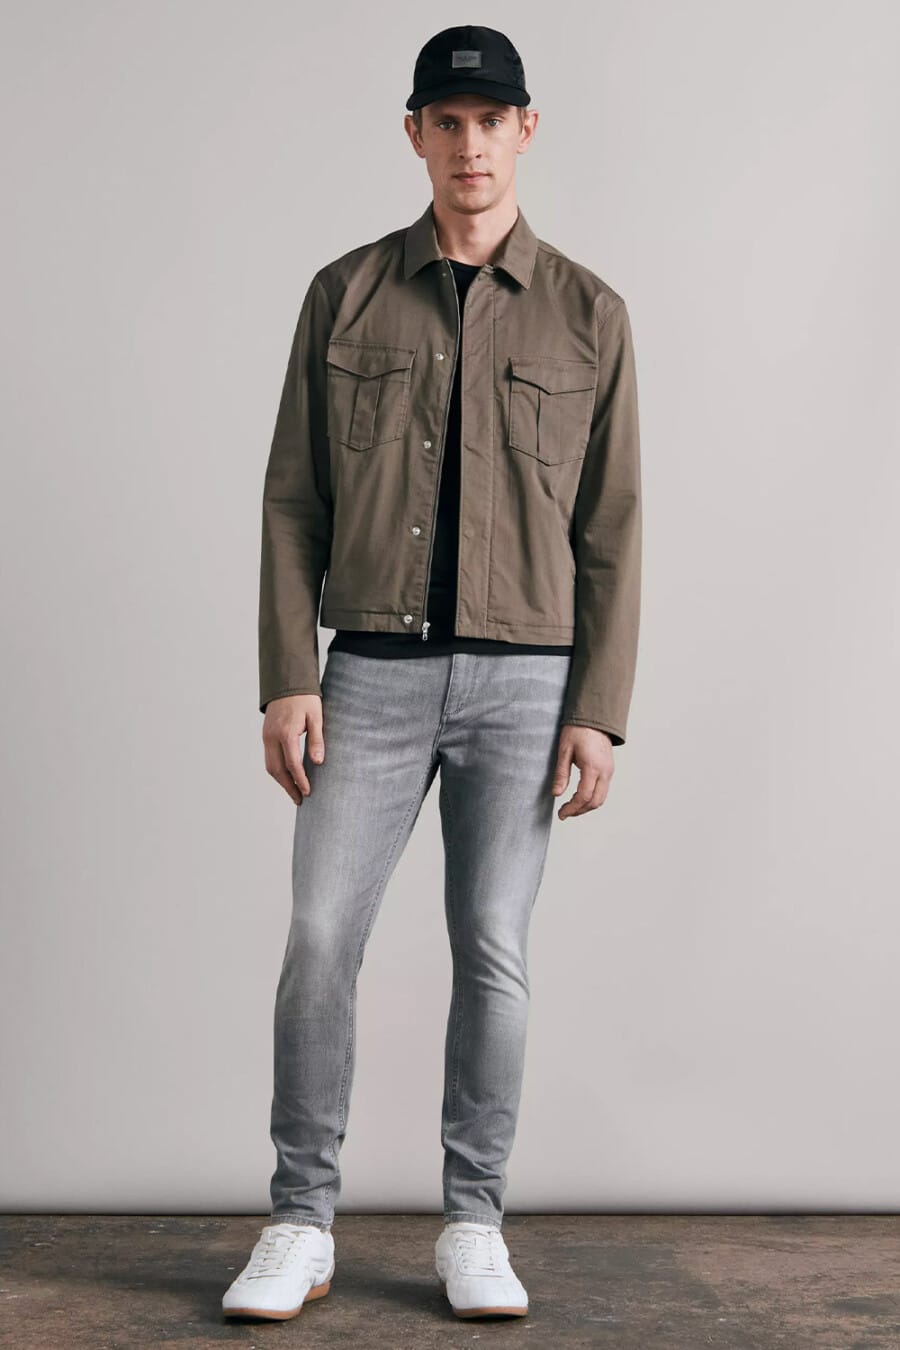 Men's light grey jeans, black T-shirt, olive green trucker jacket, black baseball cap and white sneakers outfit